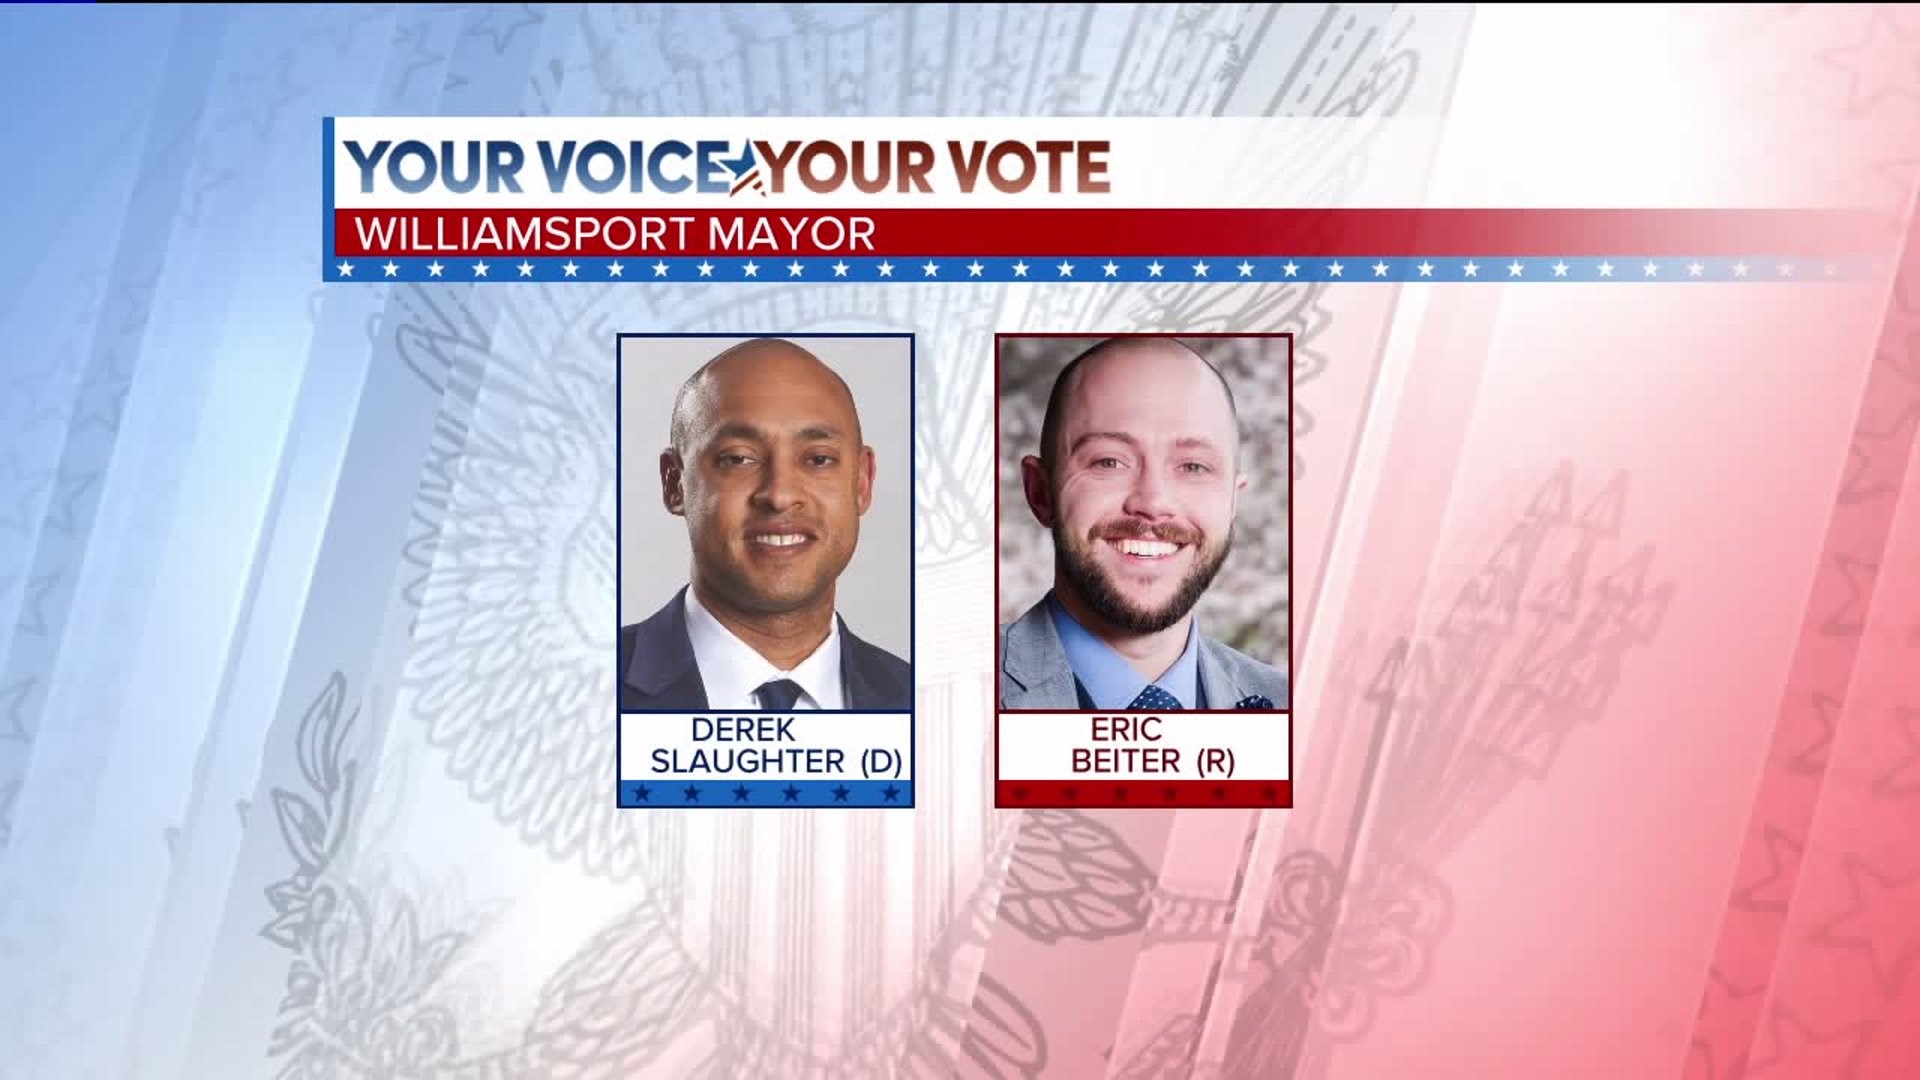 Williamsport Elects Slaughter as First Democratic Mayor in Over 20 Years